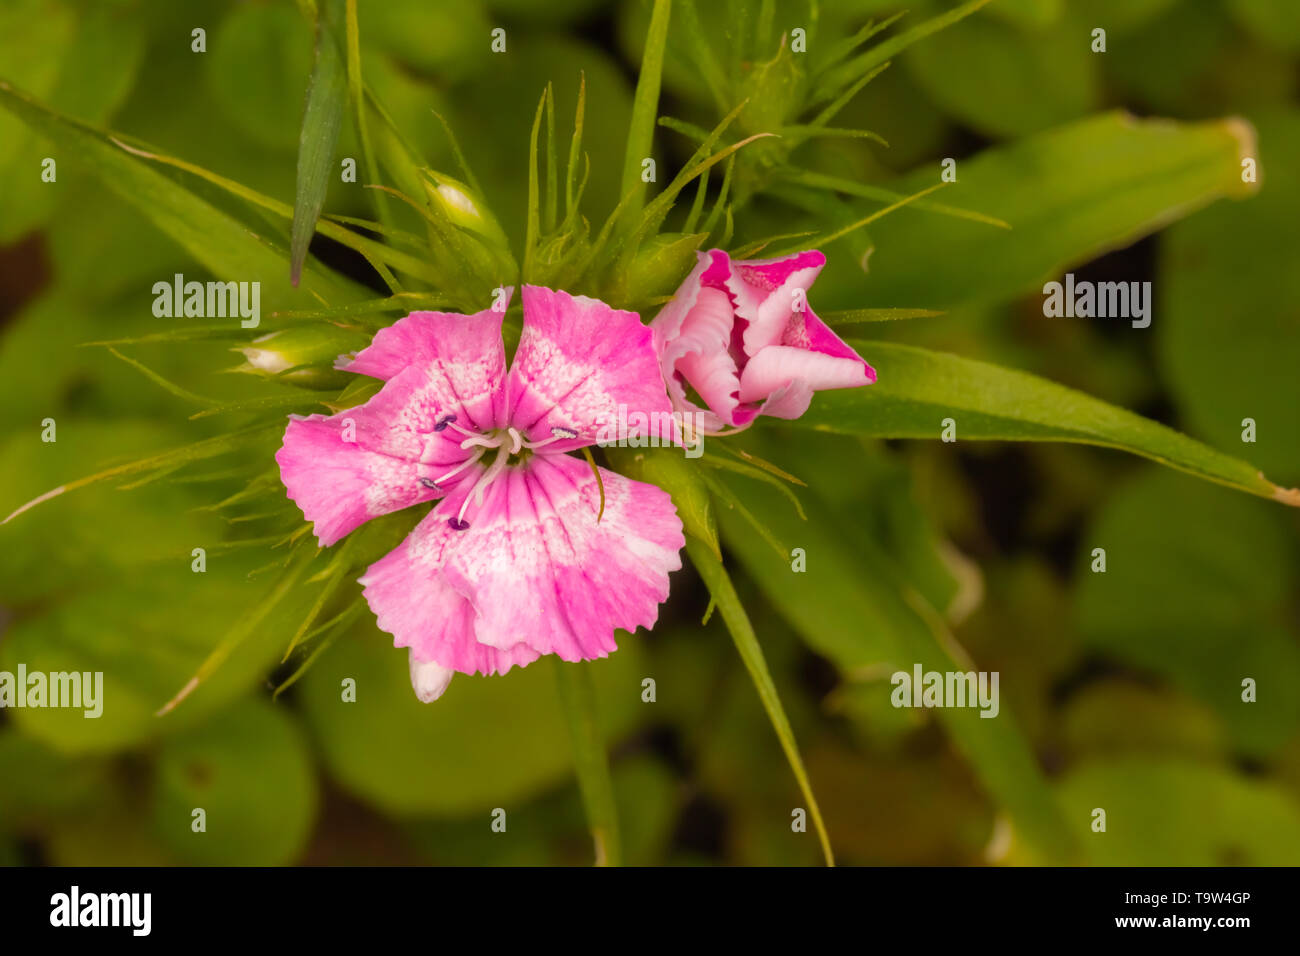 Unfurling Maiden pinks (Dianthus deltoides) flowers on green background. Stock Photo